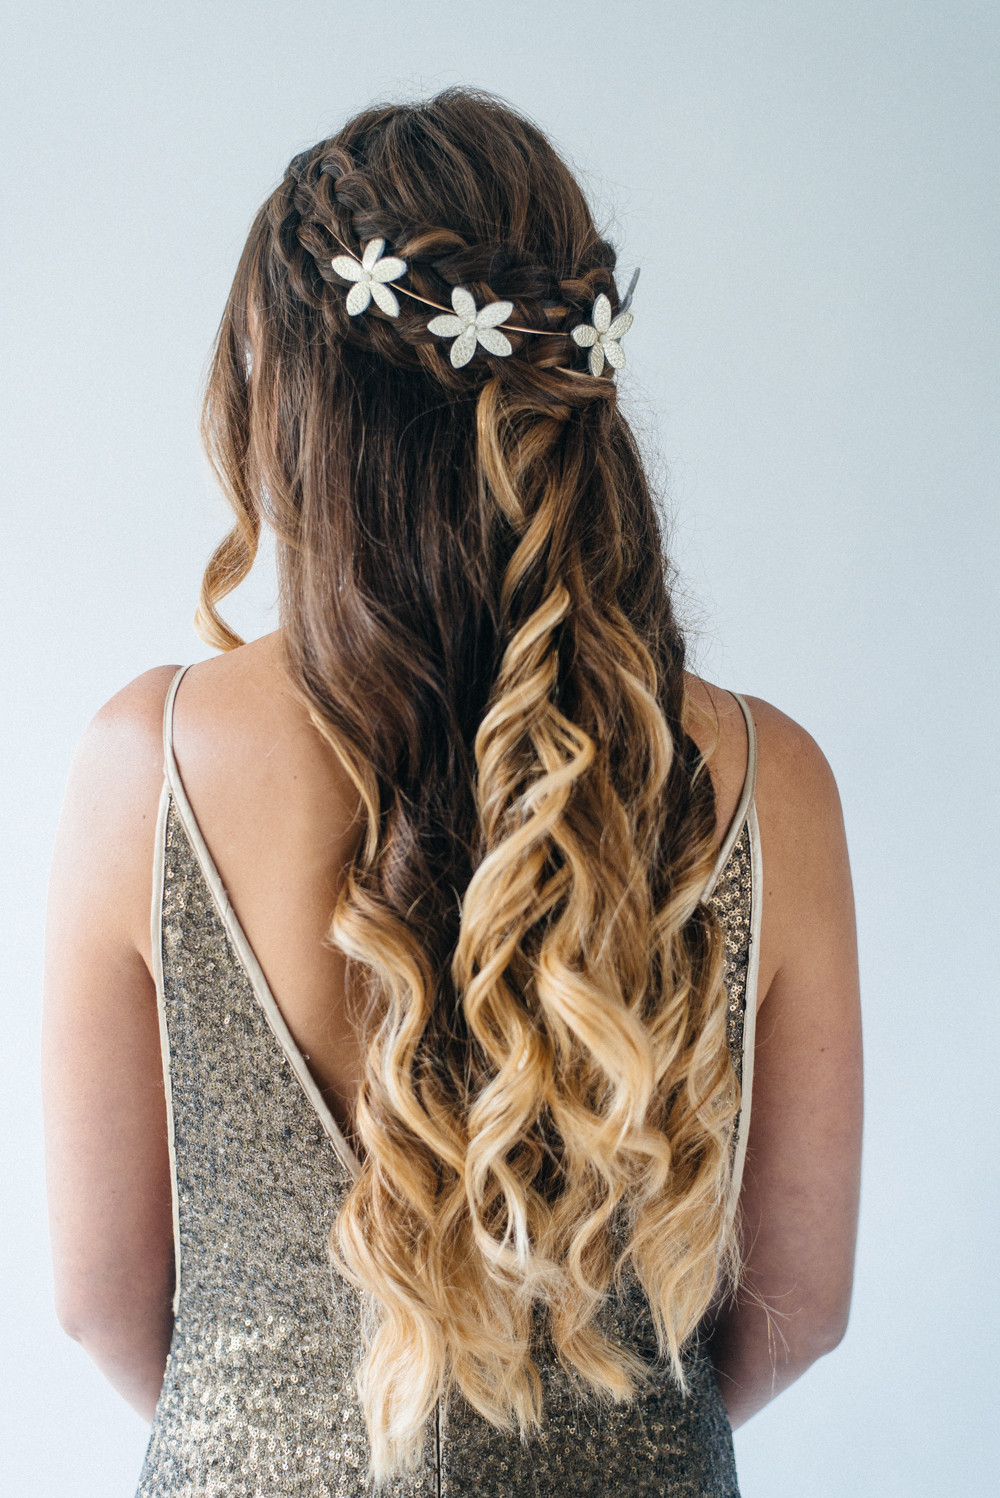 Down Hairstyles For Brides
 Inspiration For Half Up Half Down Wedding Hair With